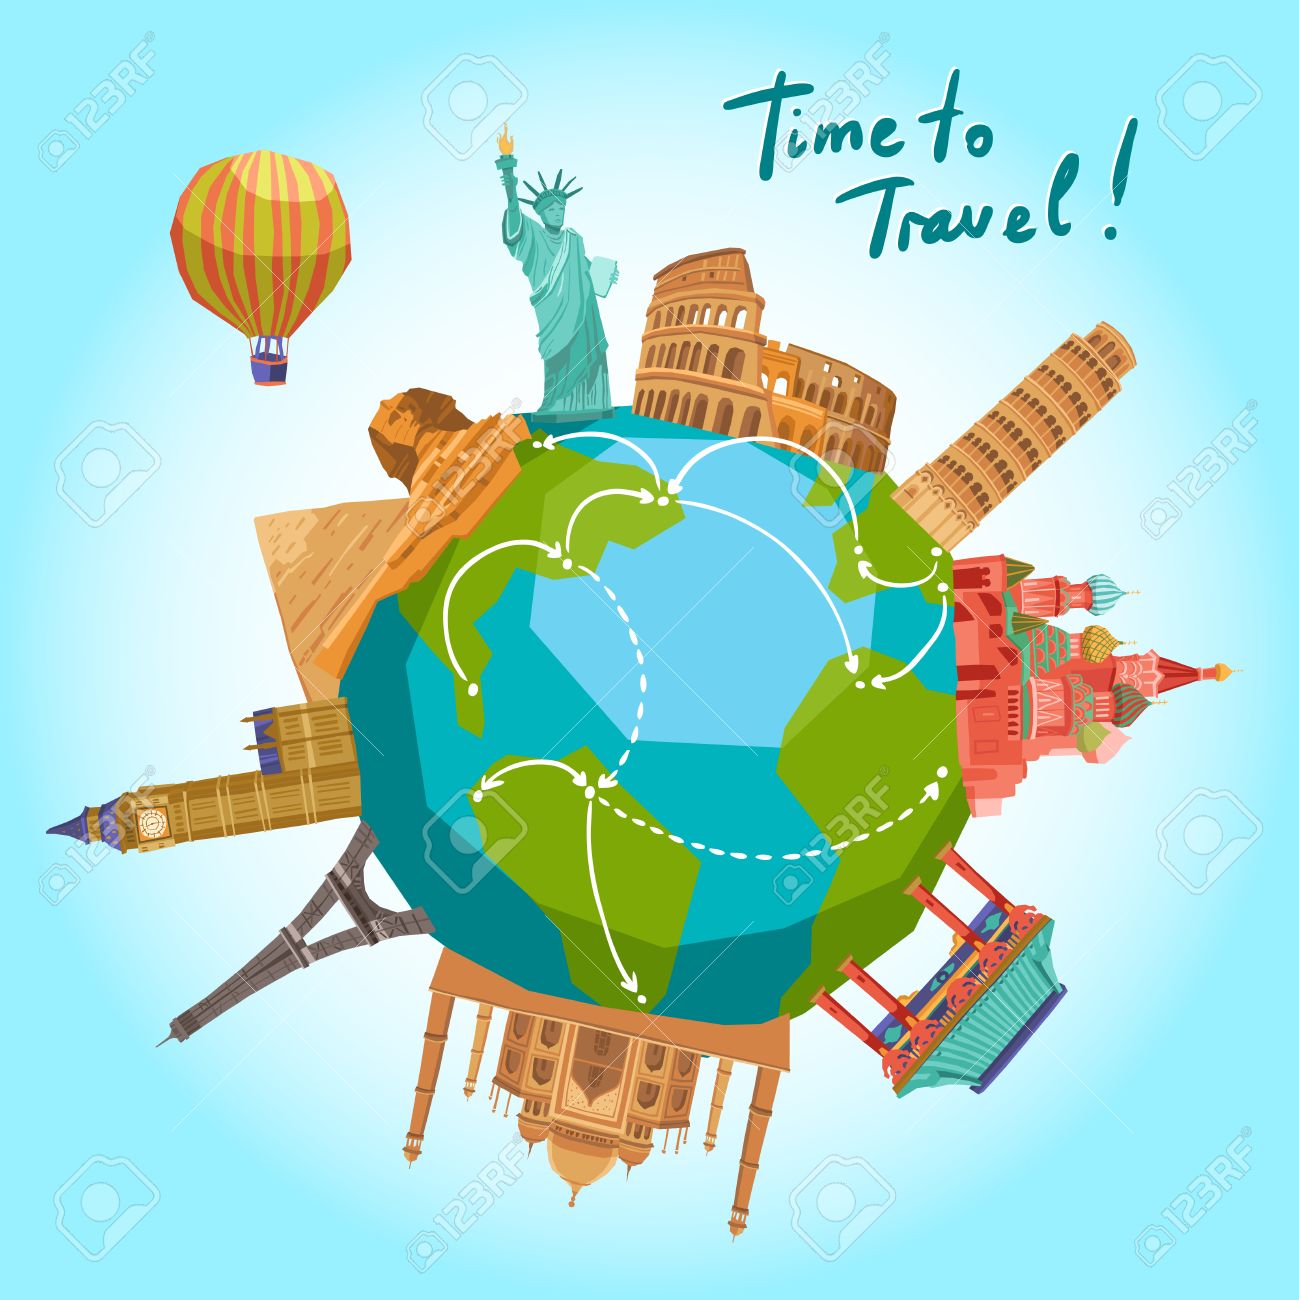 travel around the world clipart - Clip Art Library